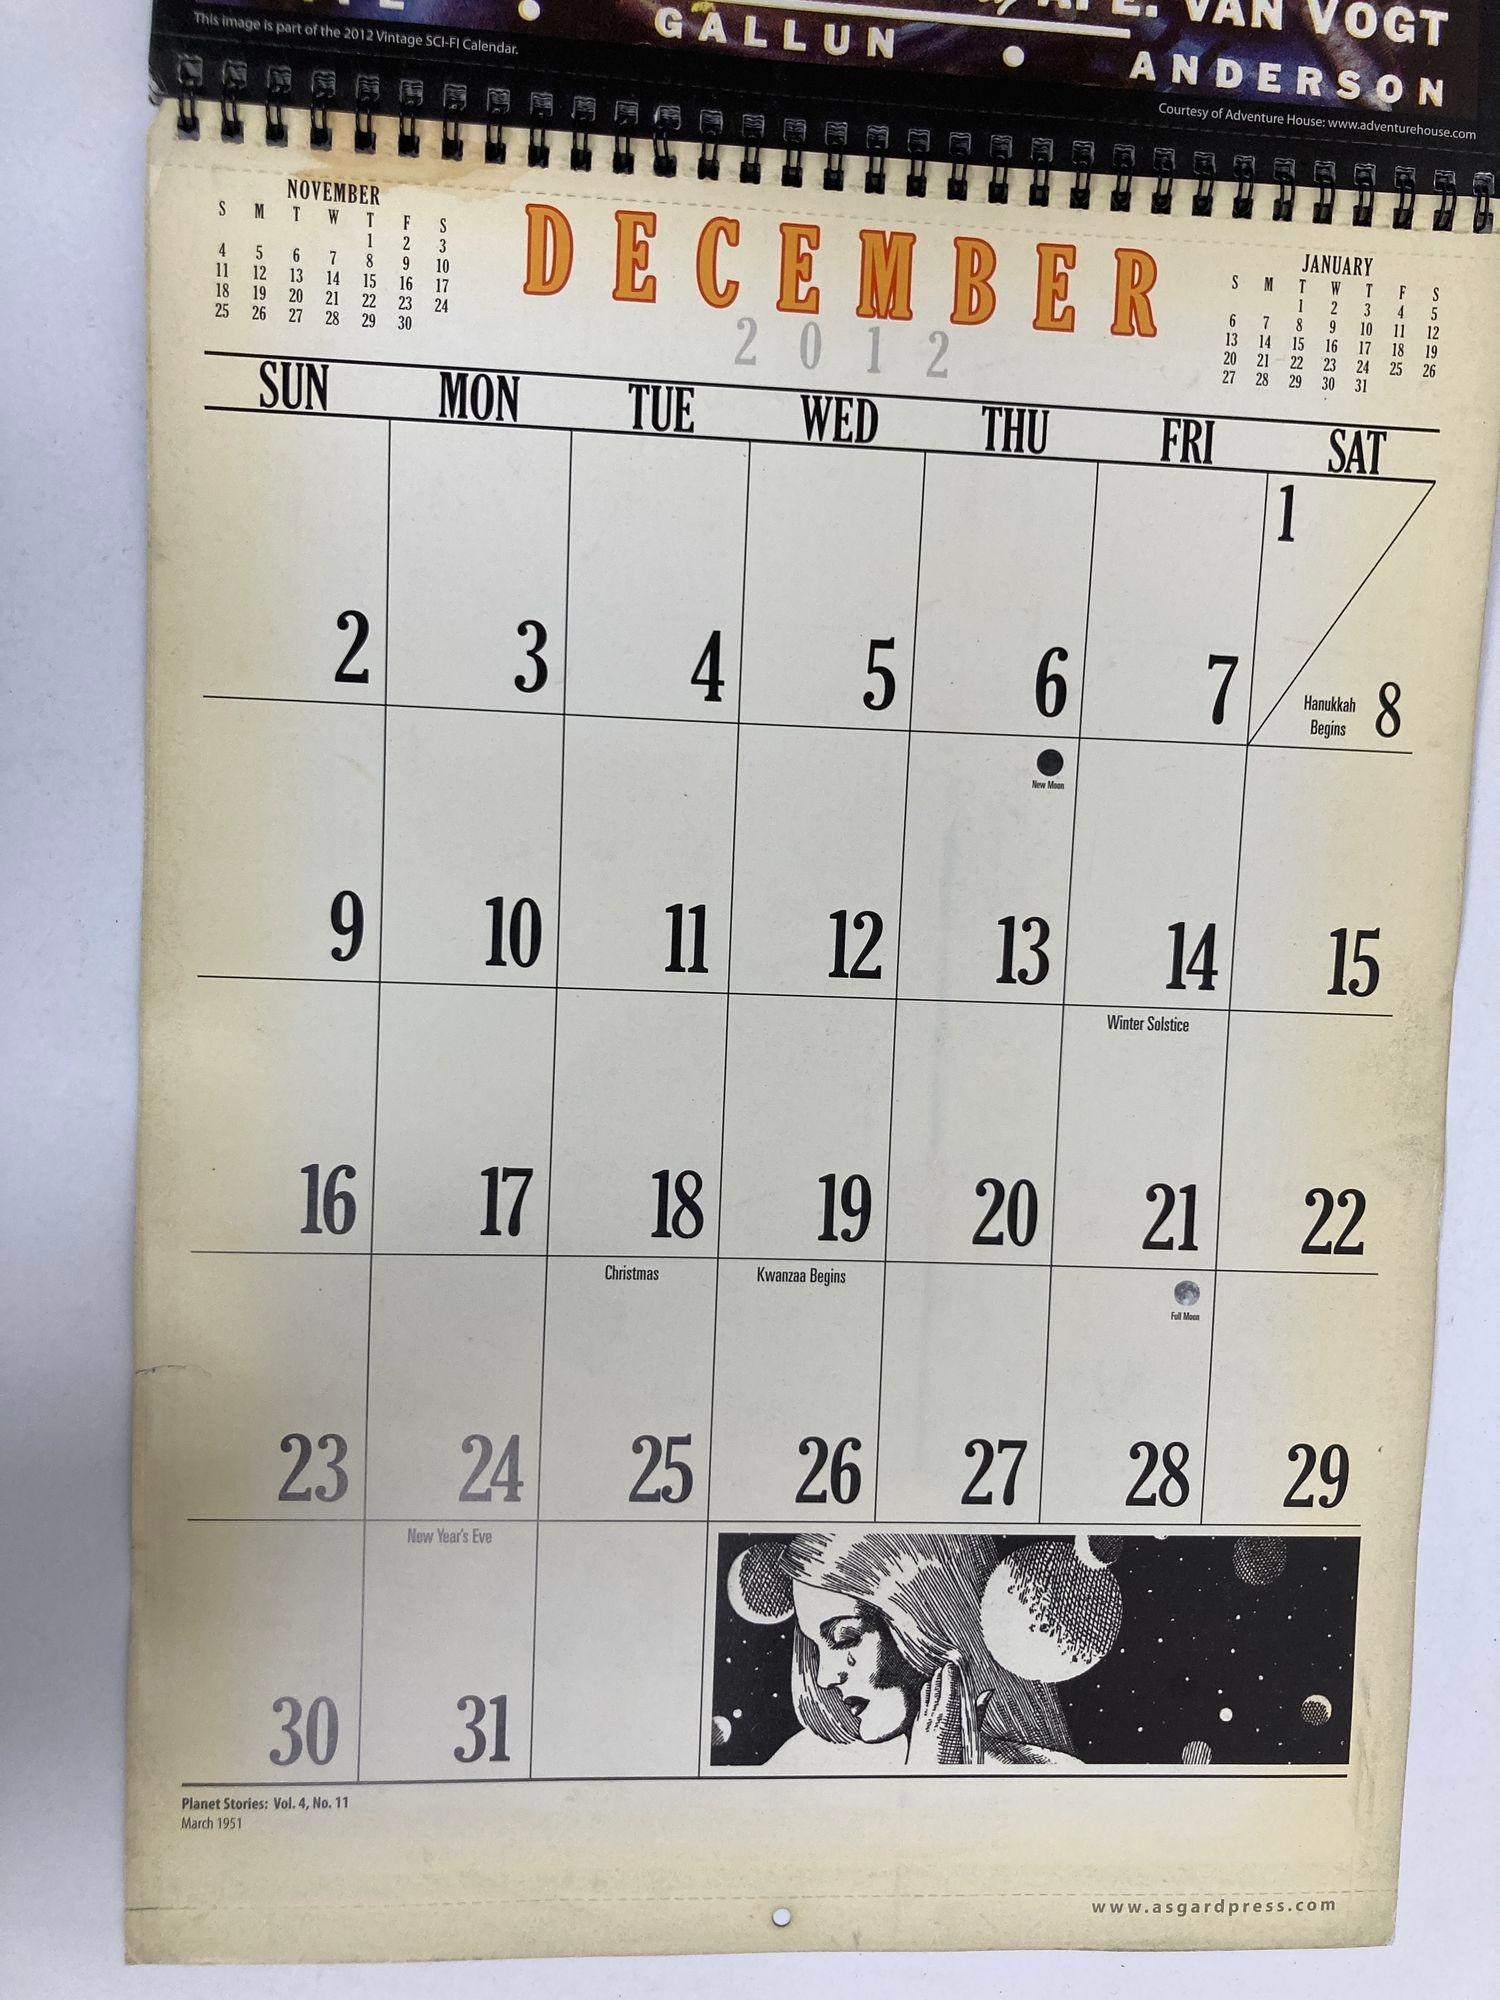 20th Century Wonder Stories Calendar 1930s Covers by Gernsback-Frank R Paul Collectible For Sale